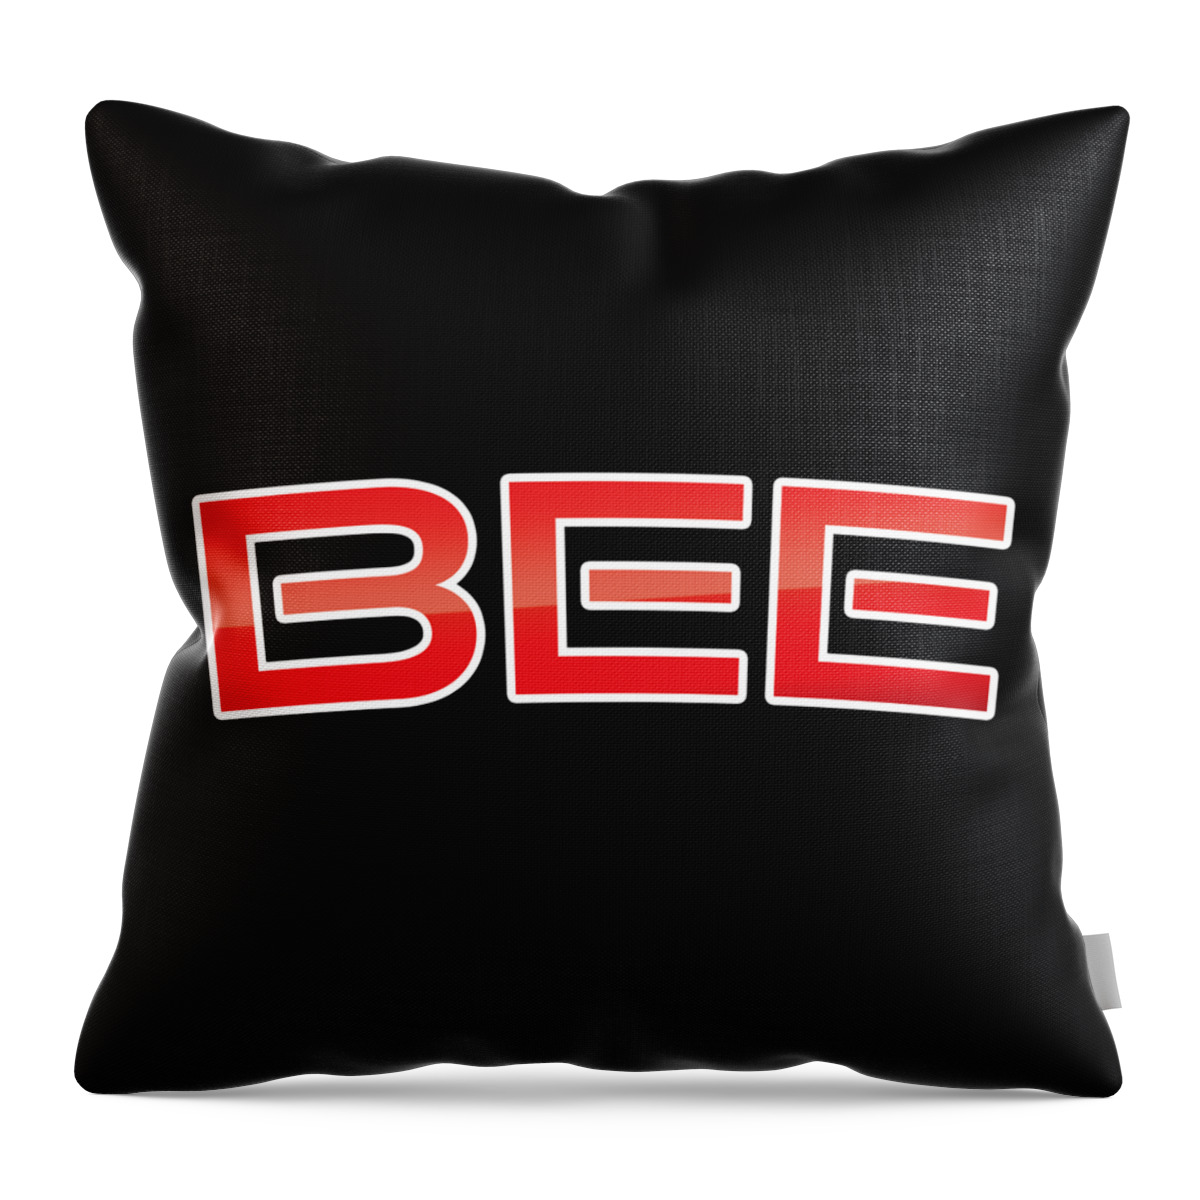 Bee Throw Pillow featuring the digital art Bee by TintoDesigns